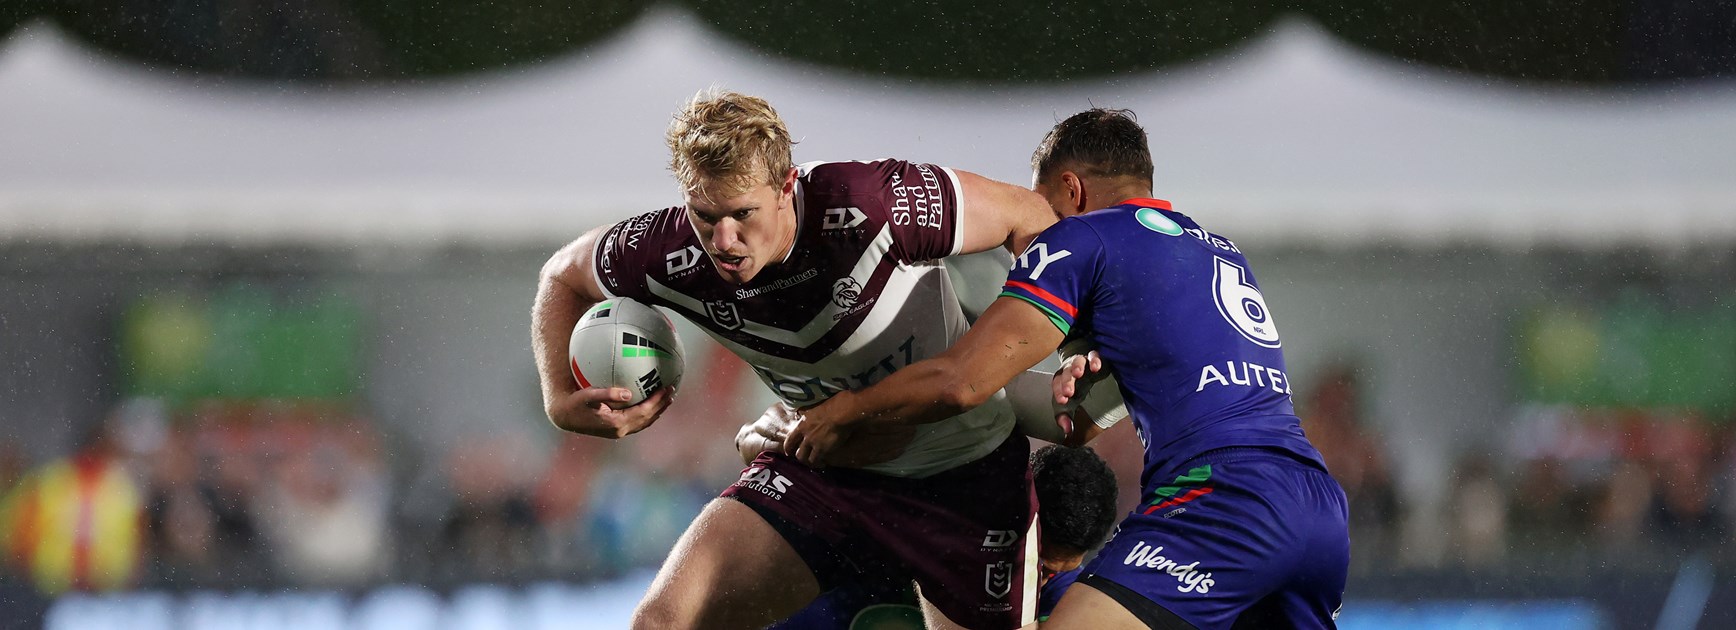 Sea Eagles injury update from Warriors game